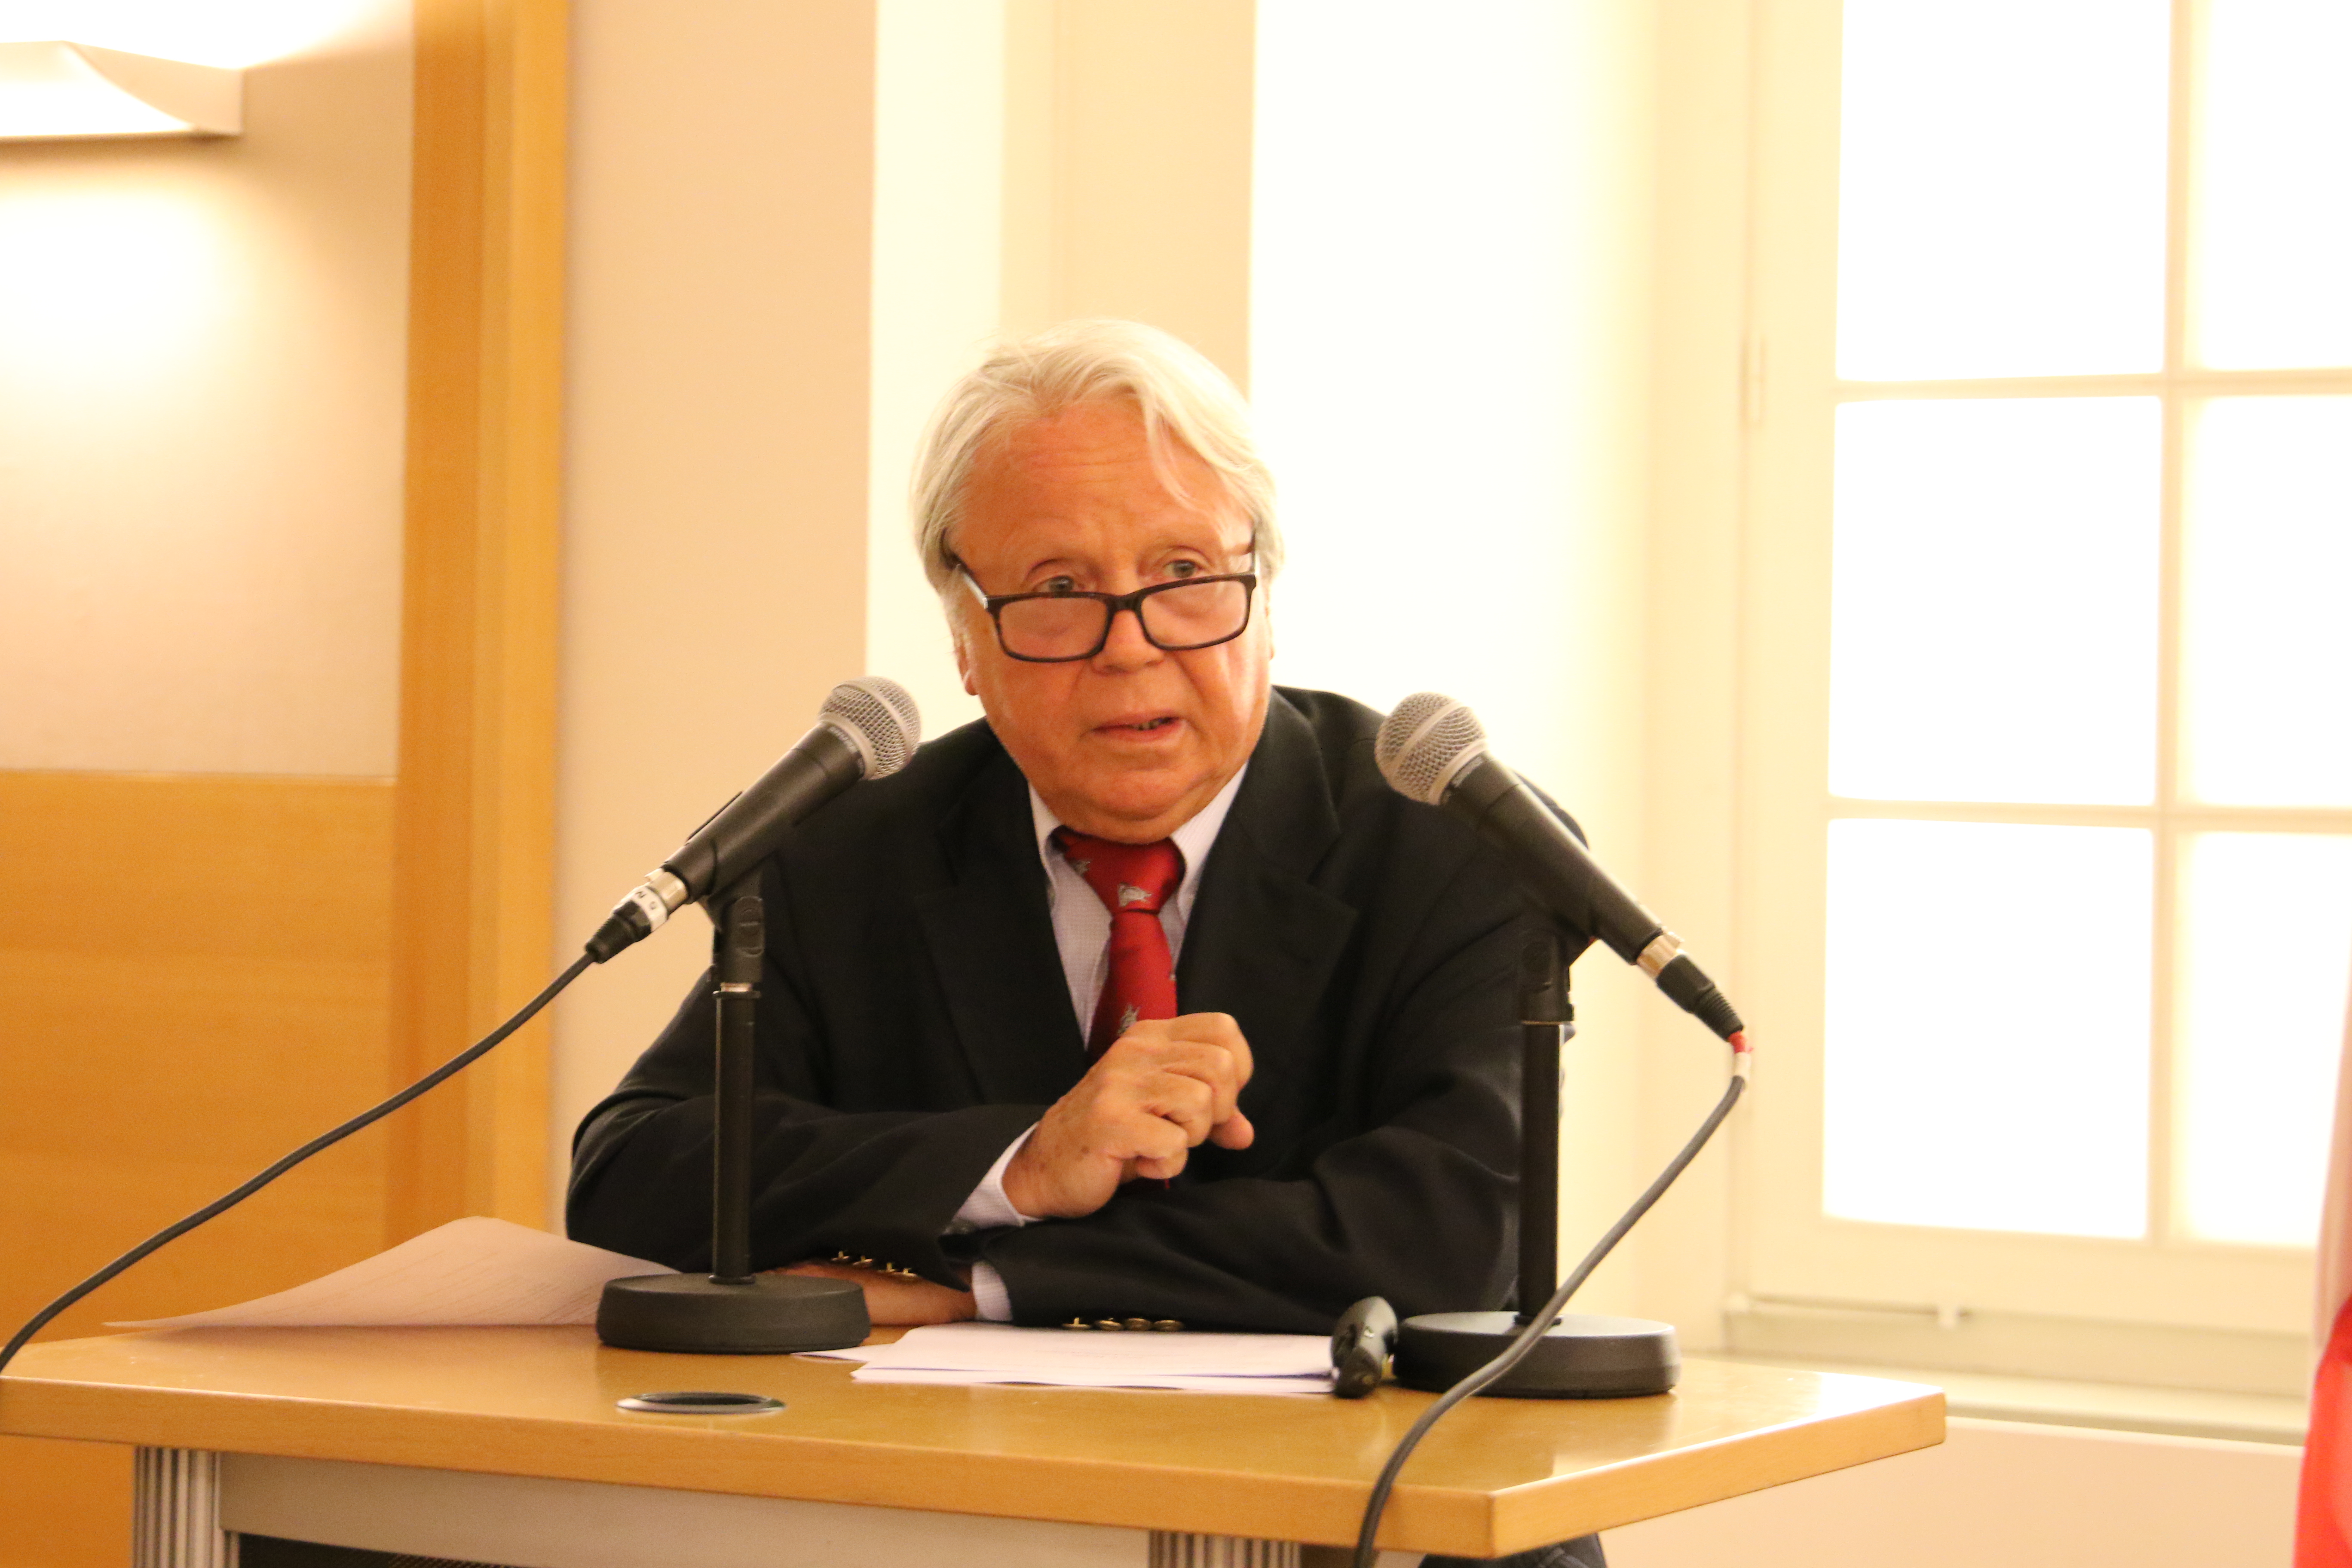 Hans Winkler, Director of the Diplomatic Academy of Vienna